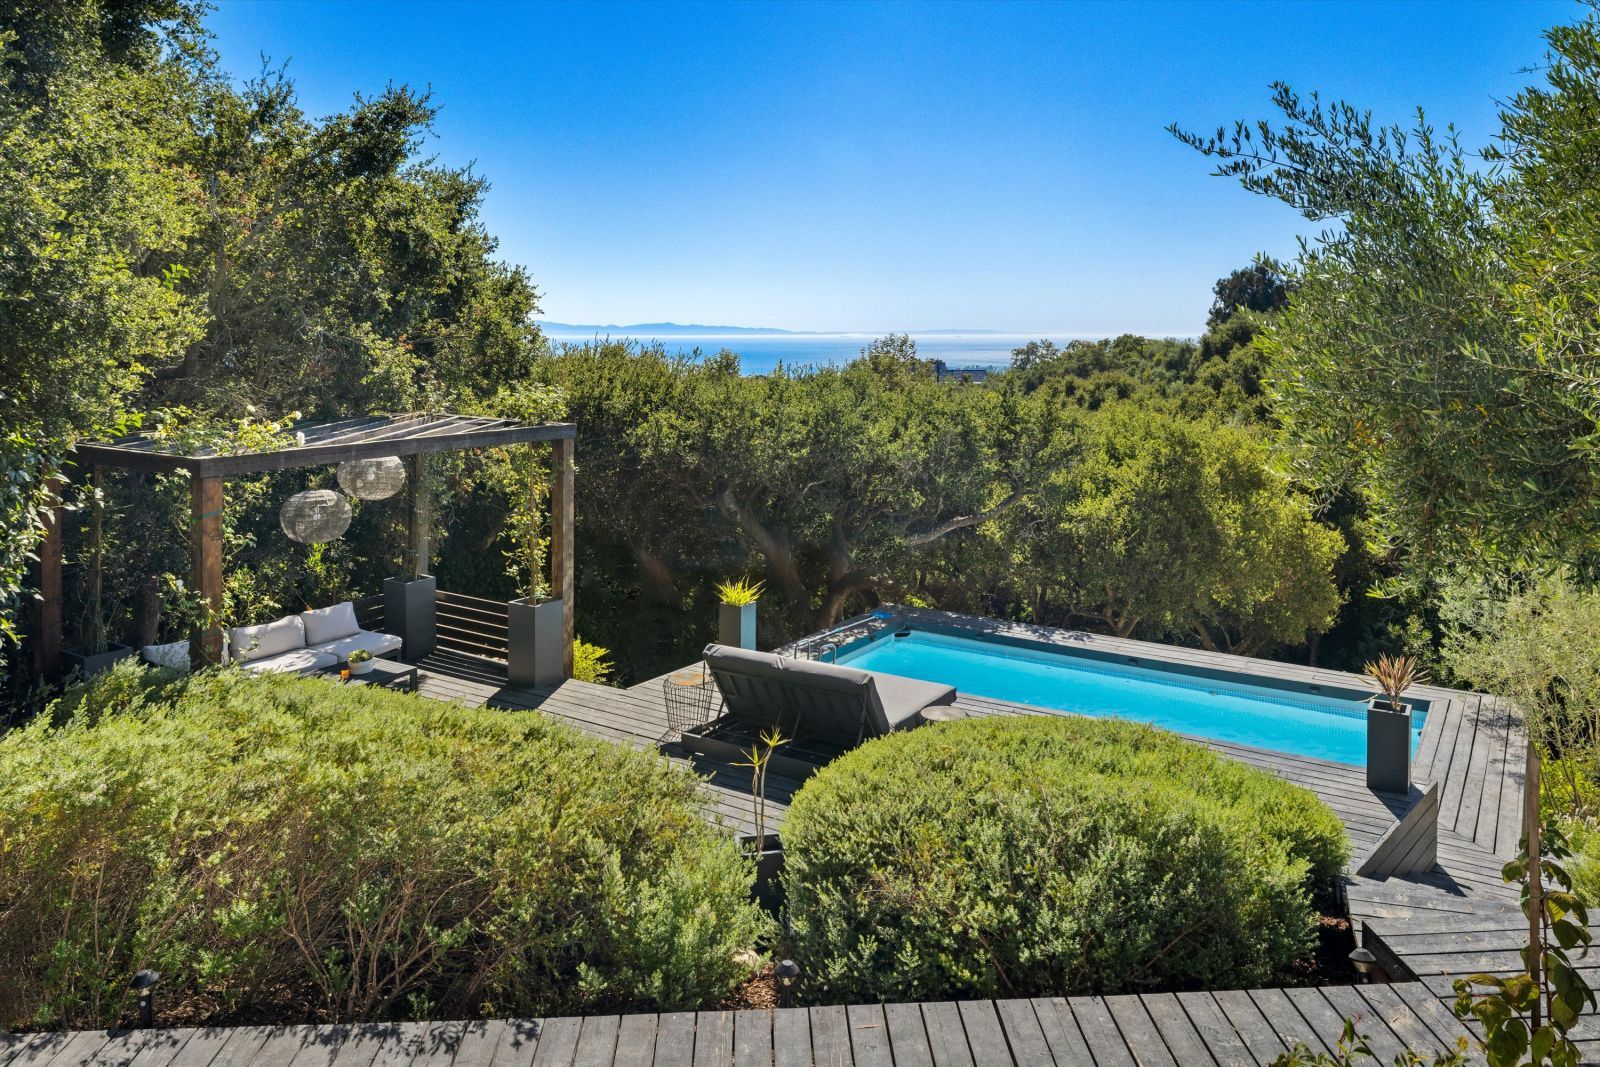 A lap pool with an ocean view in Montecito